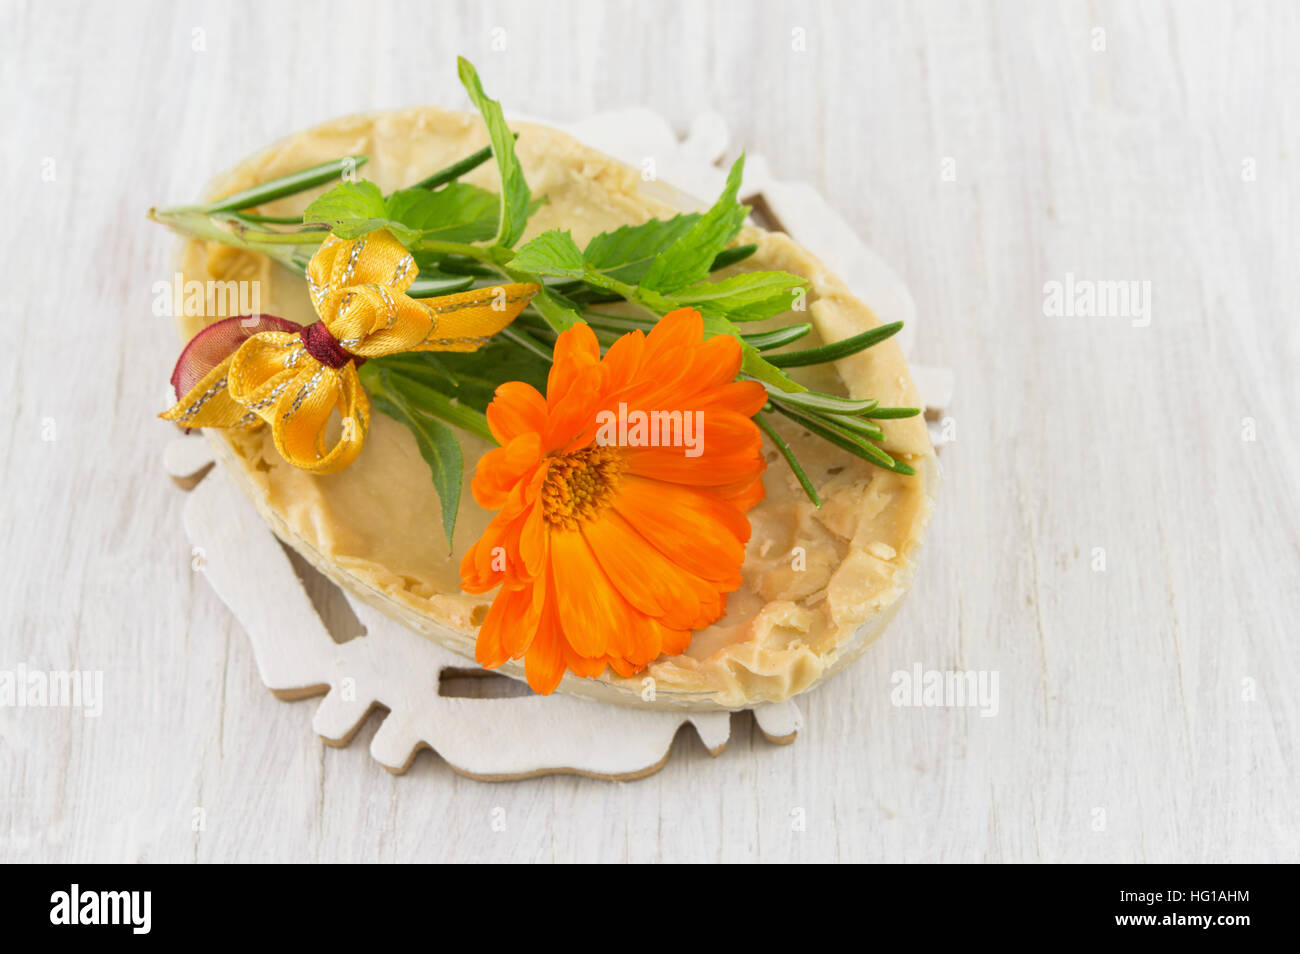 Herbal soap and an orange marigold flower Stock Photo